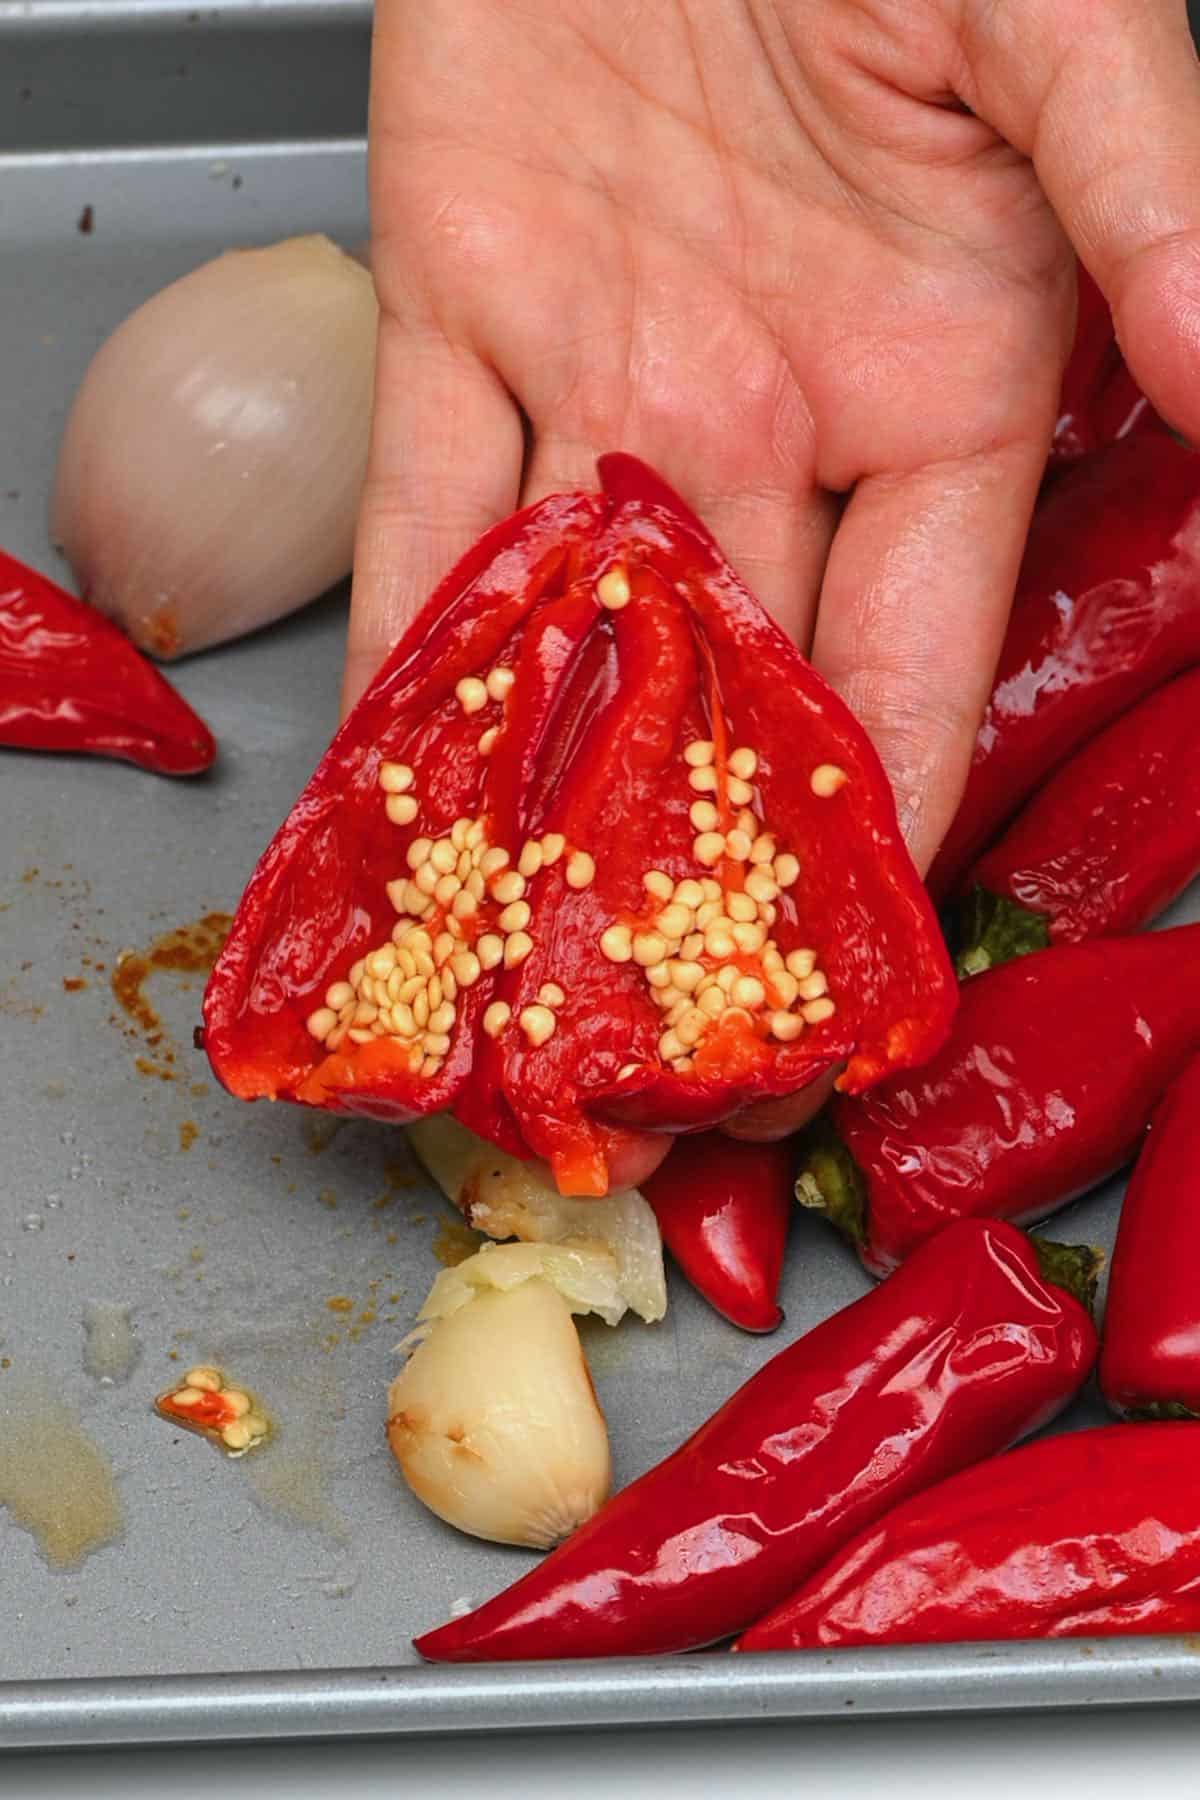 Removing seeds from roasted chilies